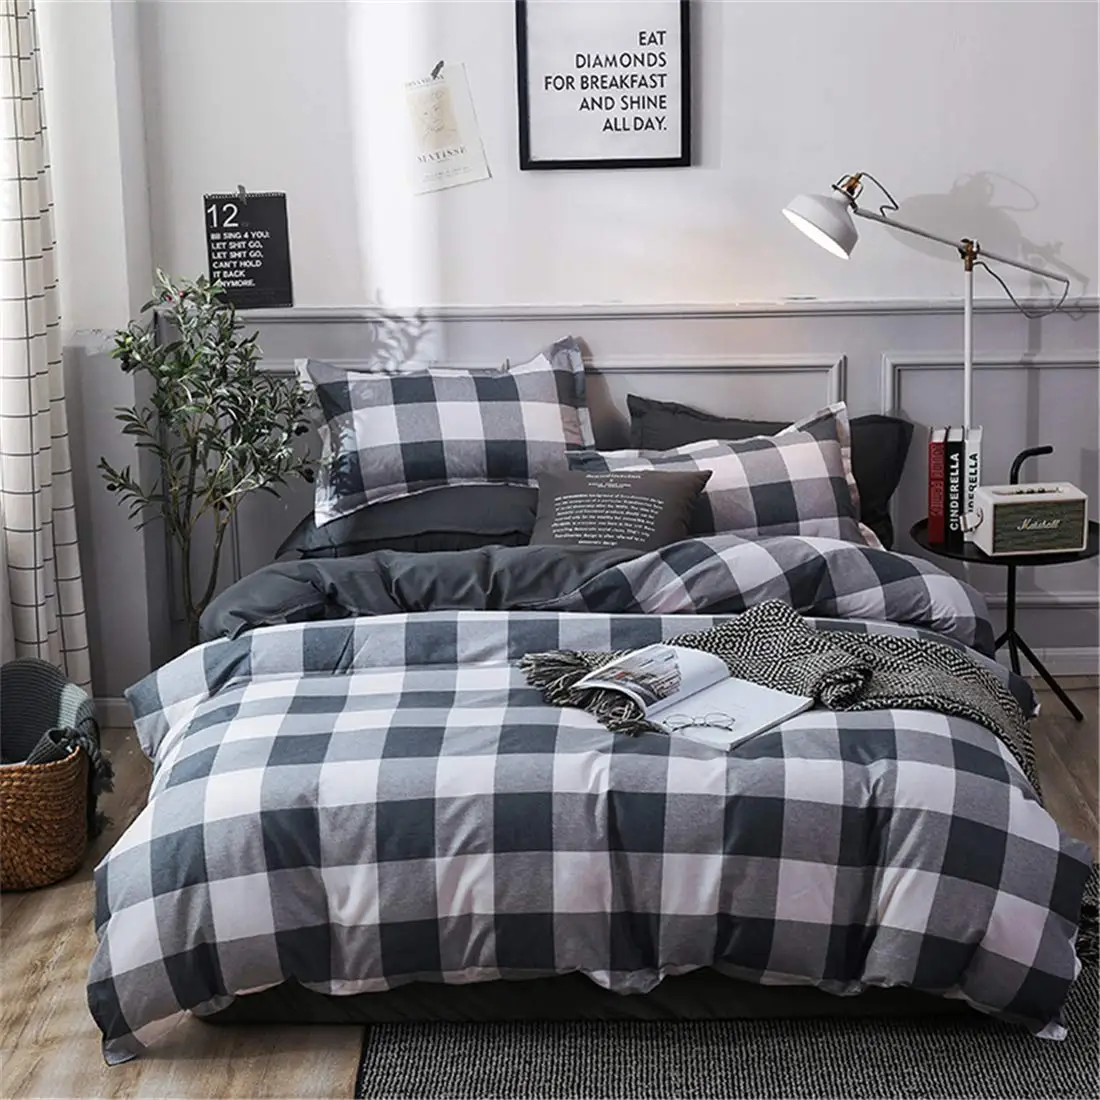 

Duvet Cover Set Buffalo Check Gingham Plaid Geometric Checker Pattern Printed in Gray Grey and White Bedding with Zipper Closure